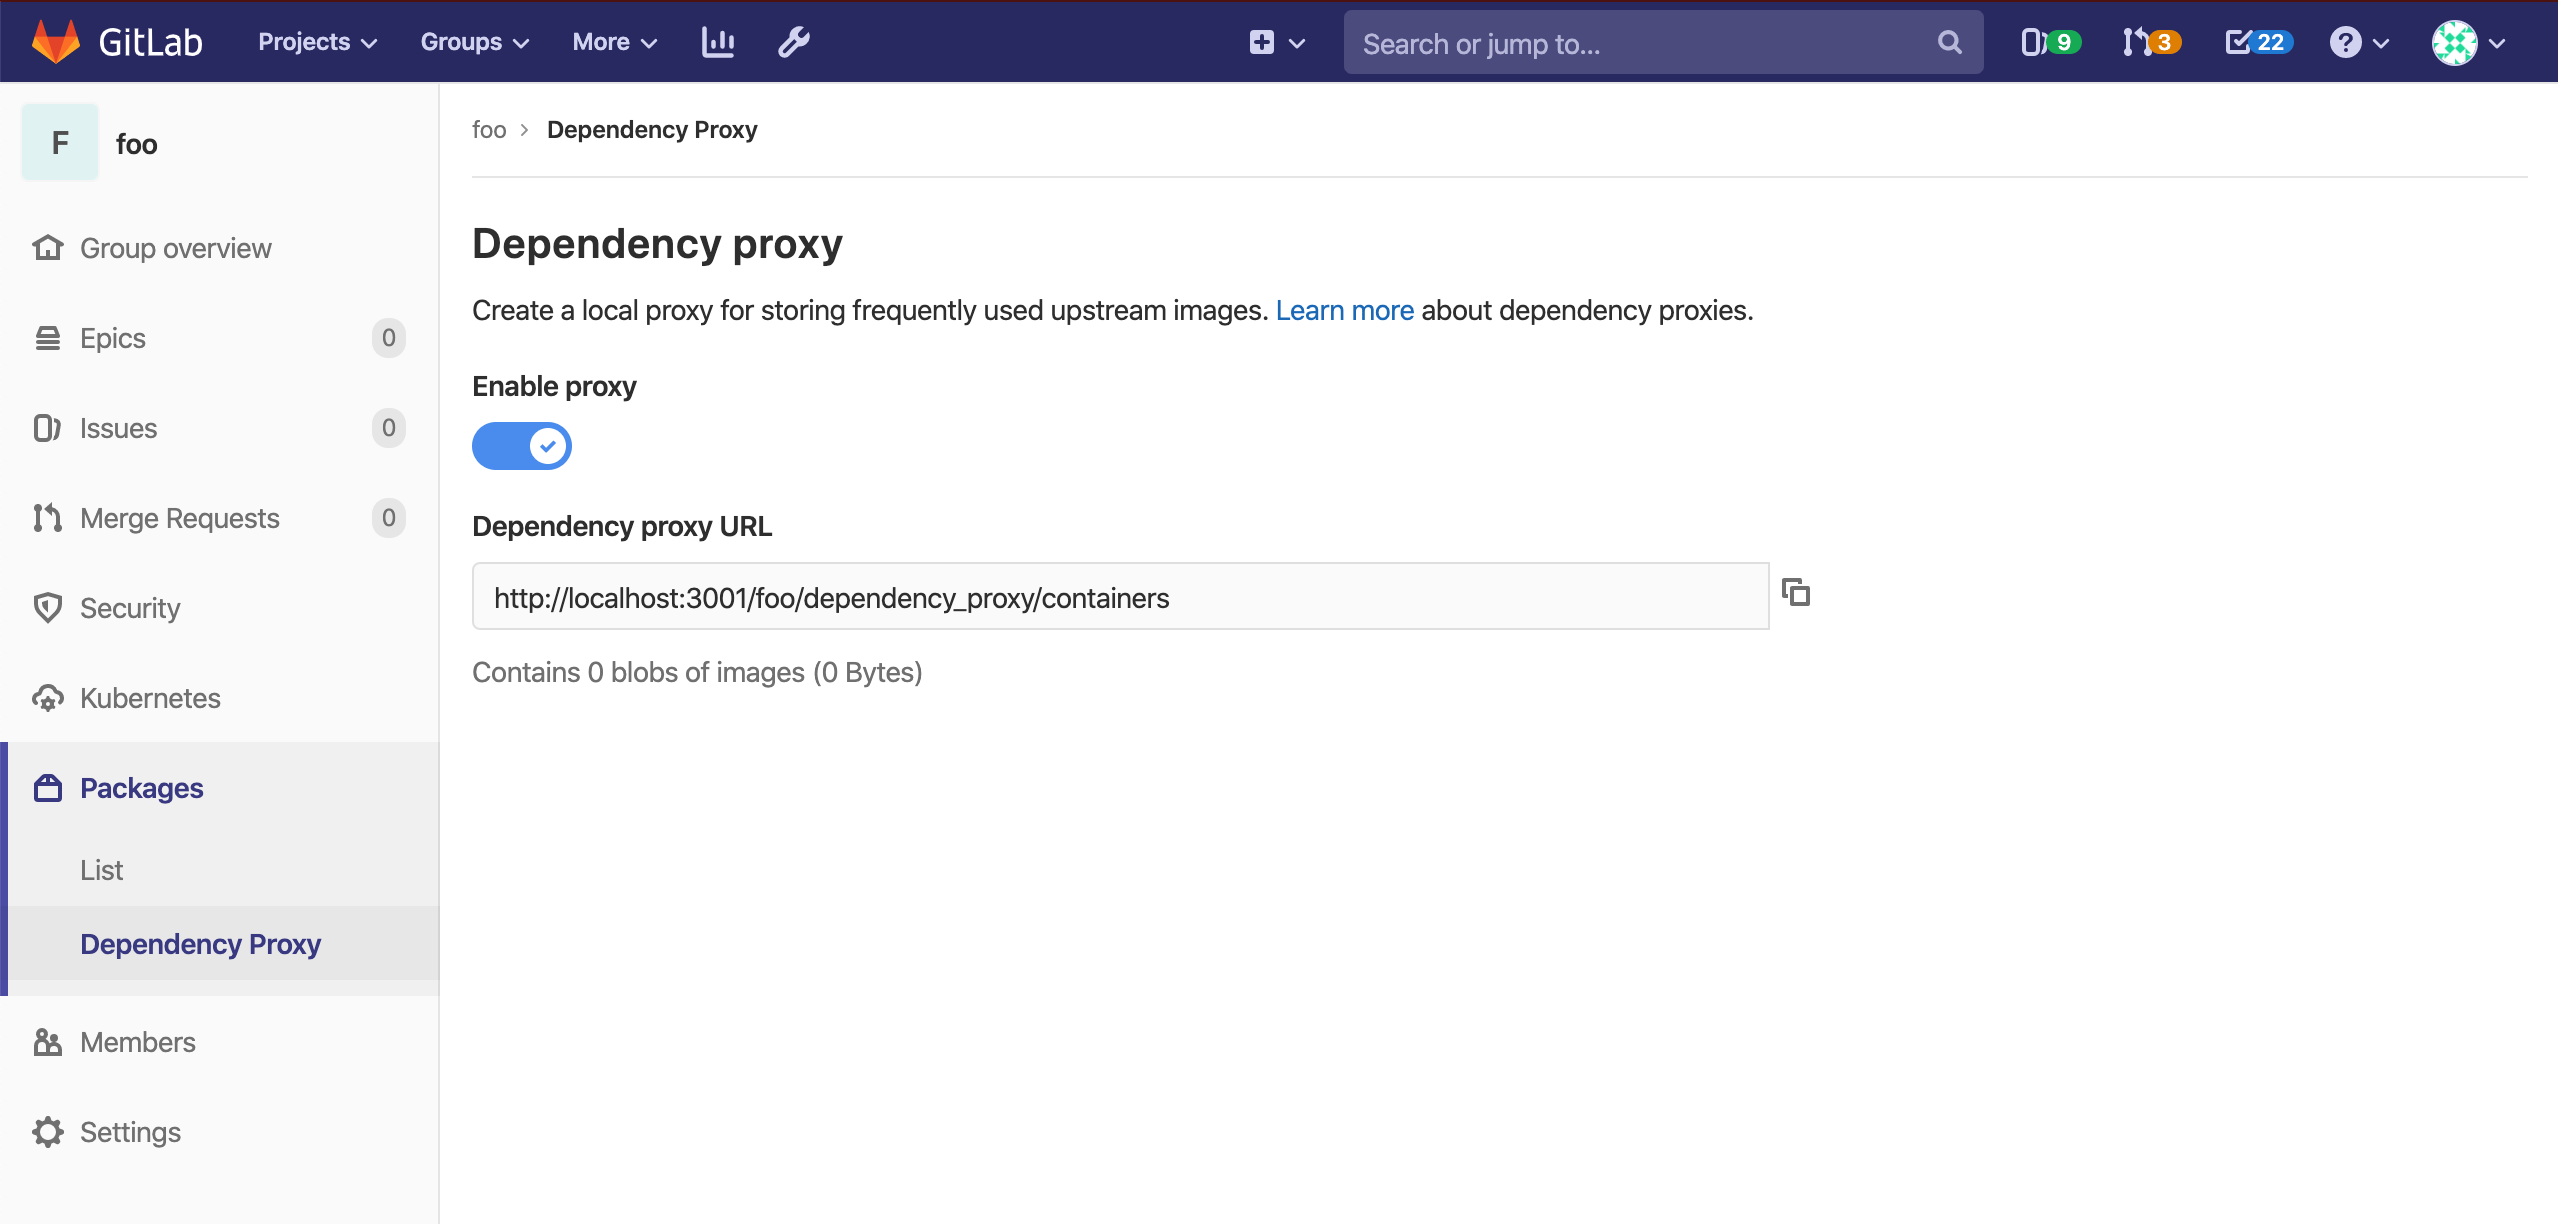 Dependency Proxy group page